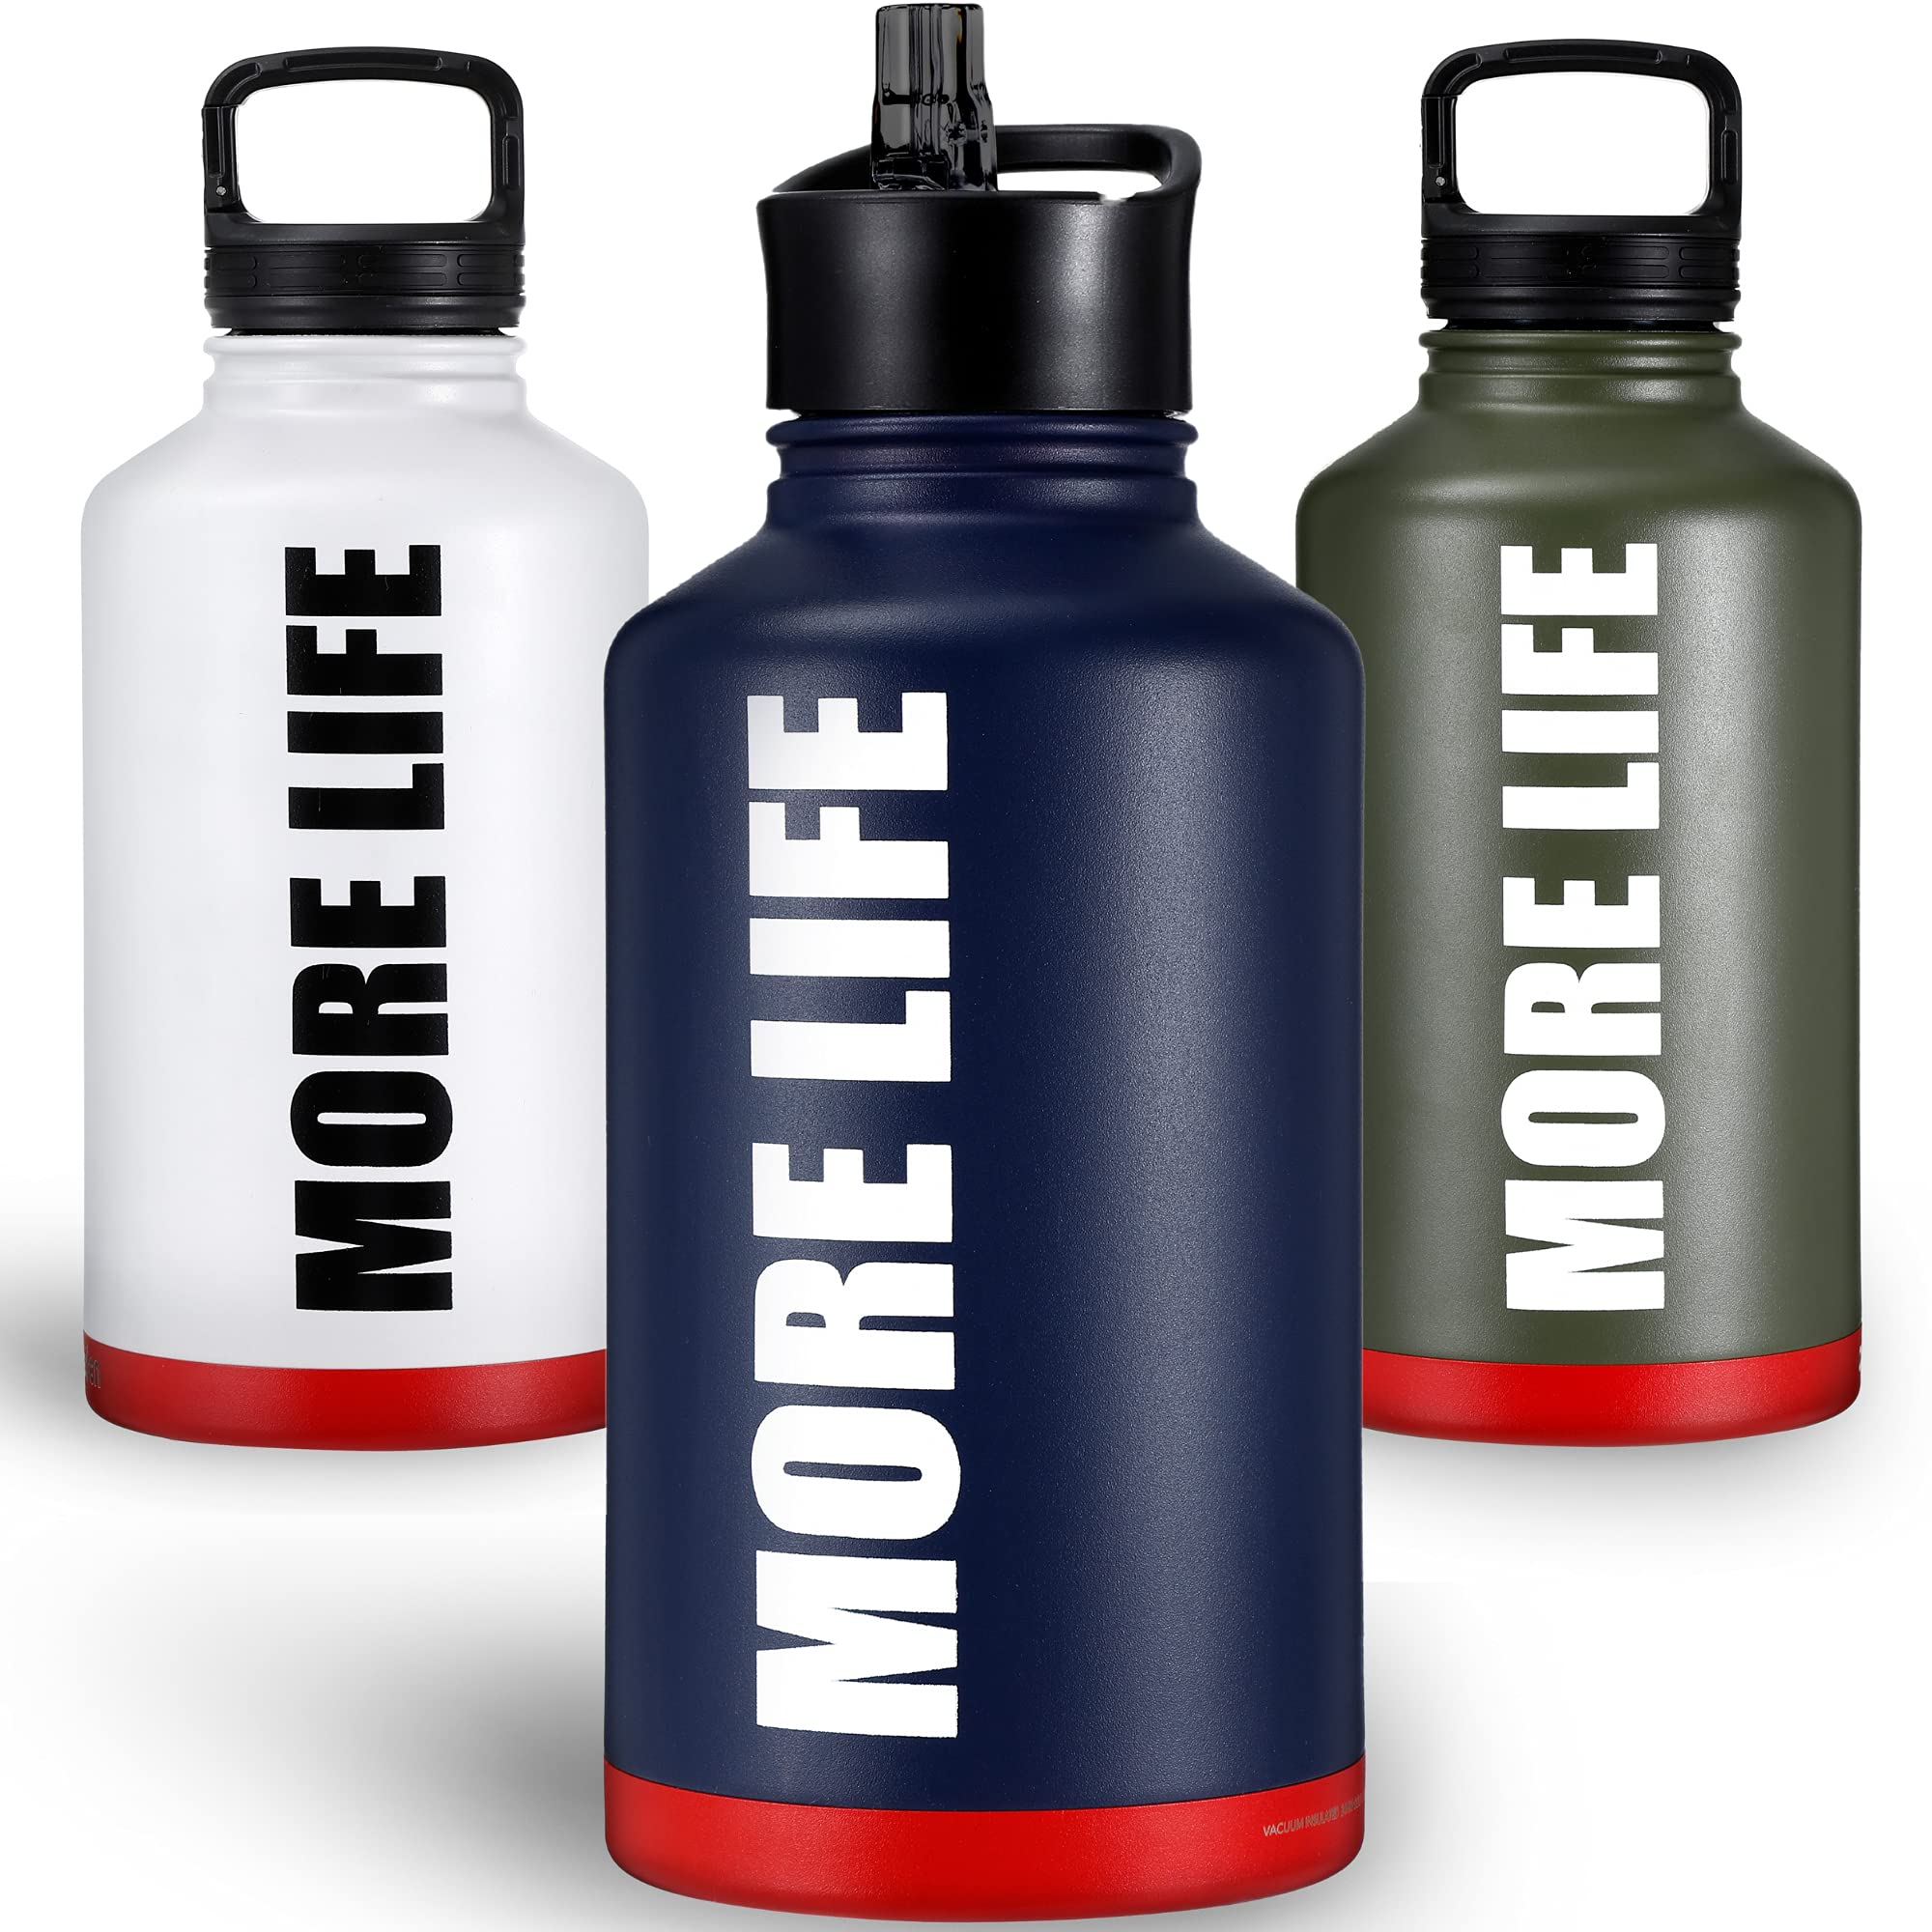 MORE LIFE Gym Water Bottle - Stainless Steel - 2 Litres - COLD 48HRS & HOT 24HRS - Metal Vacuum Insulated Water Bottle - BPA FREE - Fitness Drinks Bottle - 2 Lids, Straw & Shoulder Strap - Navy Blue